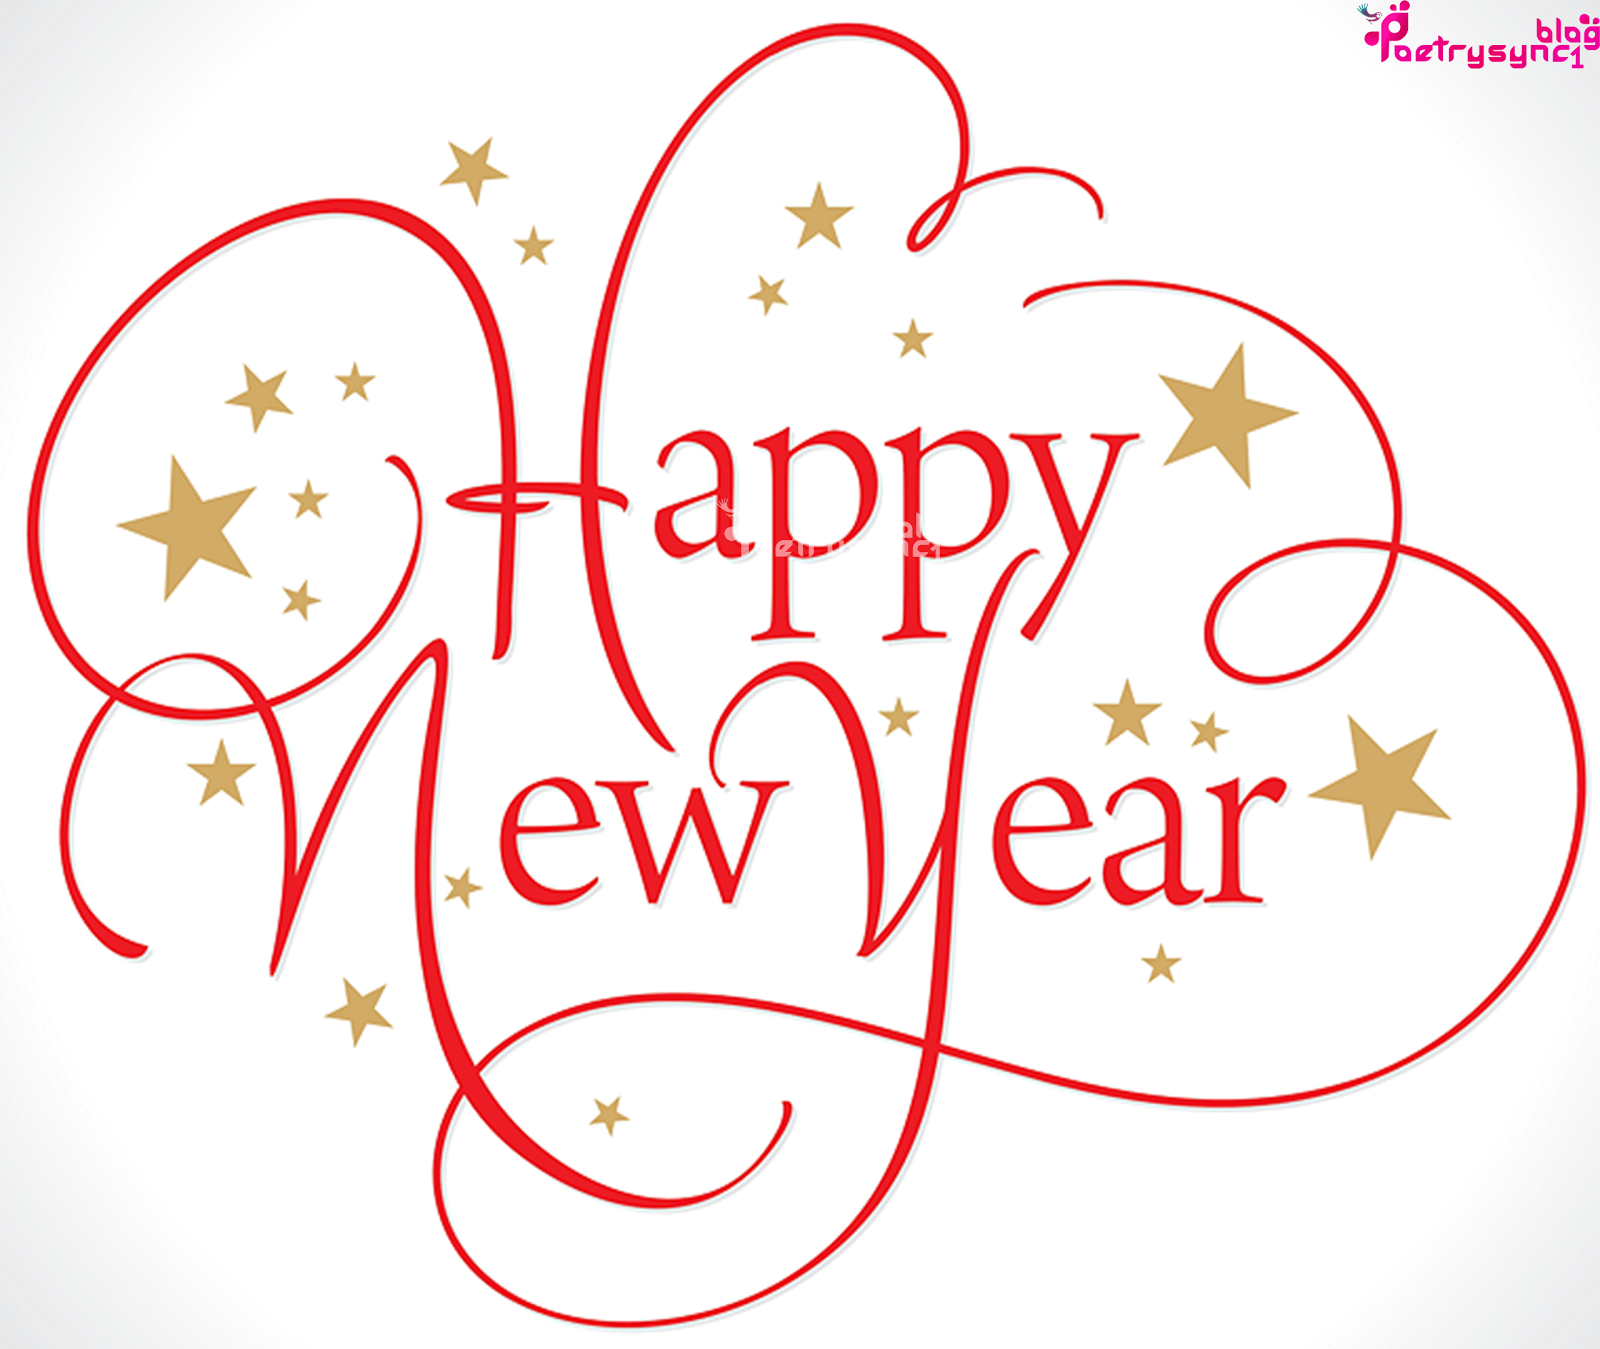 Happy-New-Year-Best-Wishes_Image-By-Poetrysync1.blog